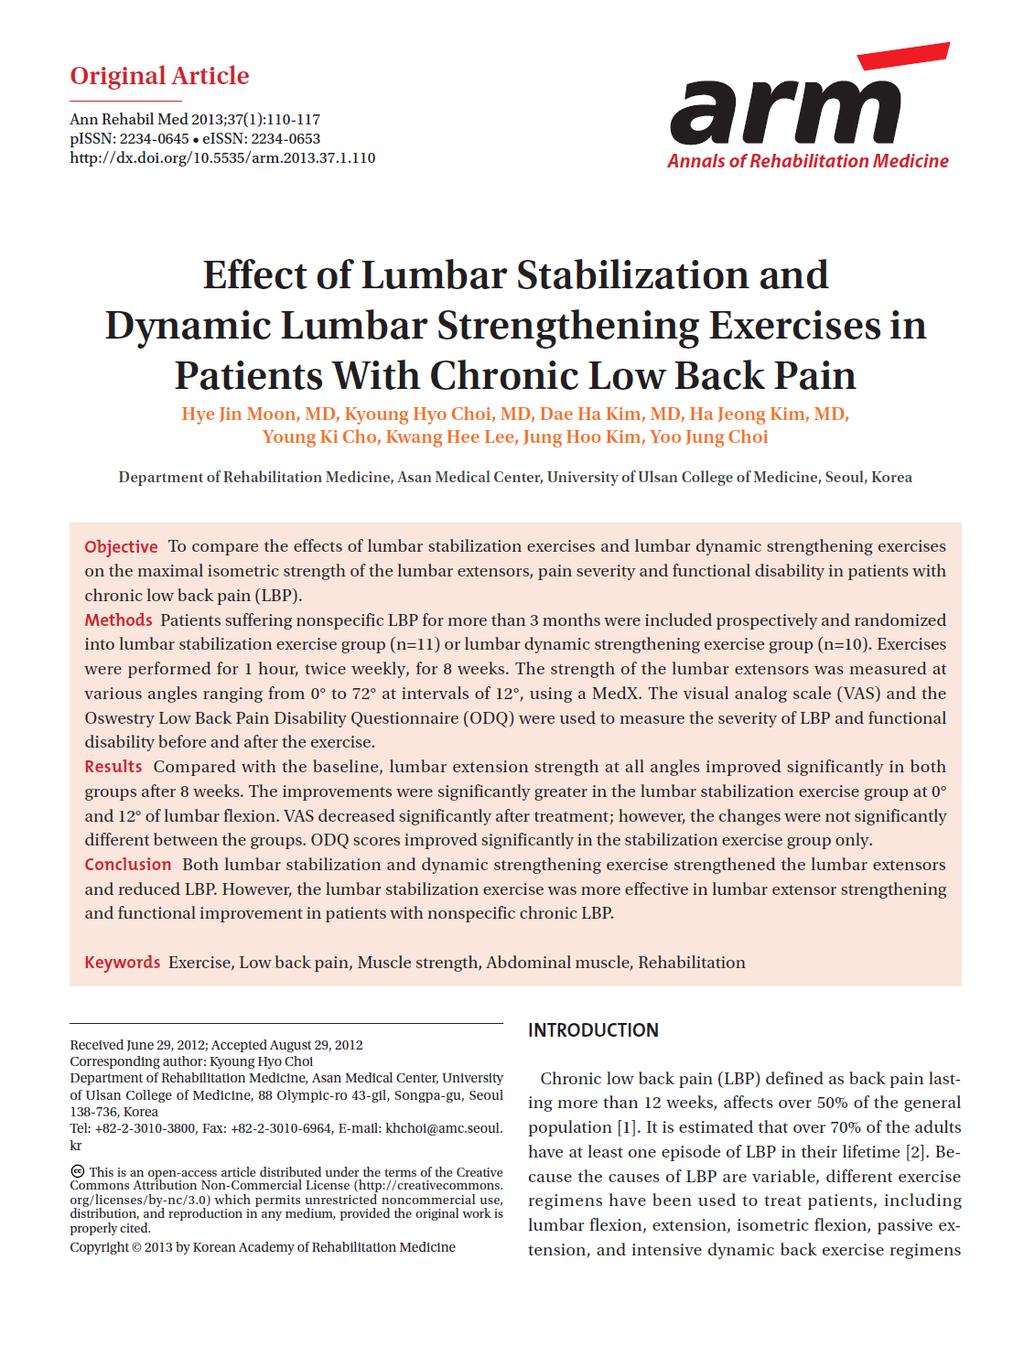 Effect of Lumbar Stabilization and Dynamic Lumbar Strengthening Exercises in Patients With Chronic Low Back Pain Conclusions Both lumbar stabilization and dynamic strengthening exercise